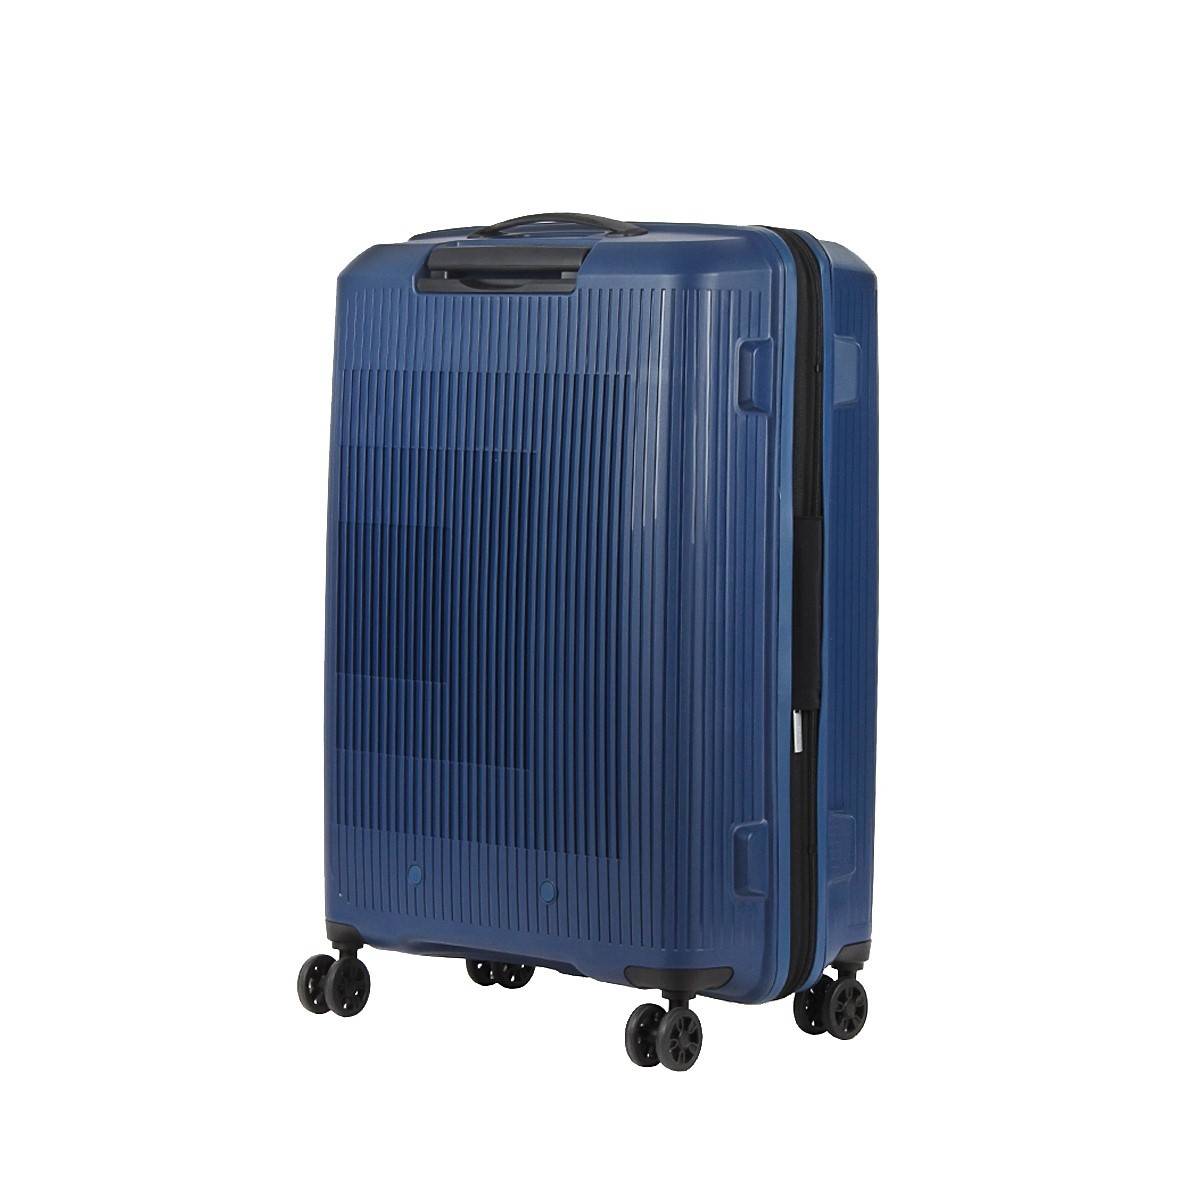 American tourister by samsonite Spinner m 4 ruote Navy blue Aerostep MD8*41002